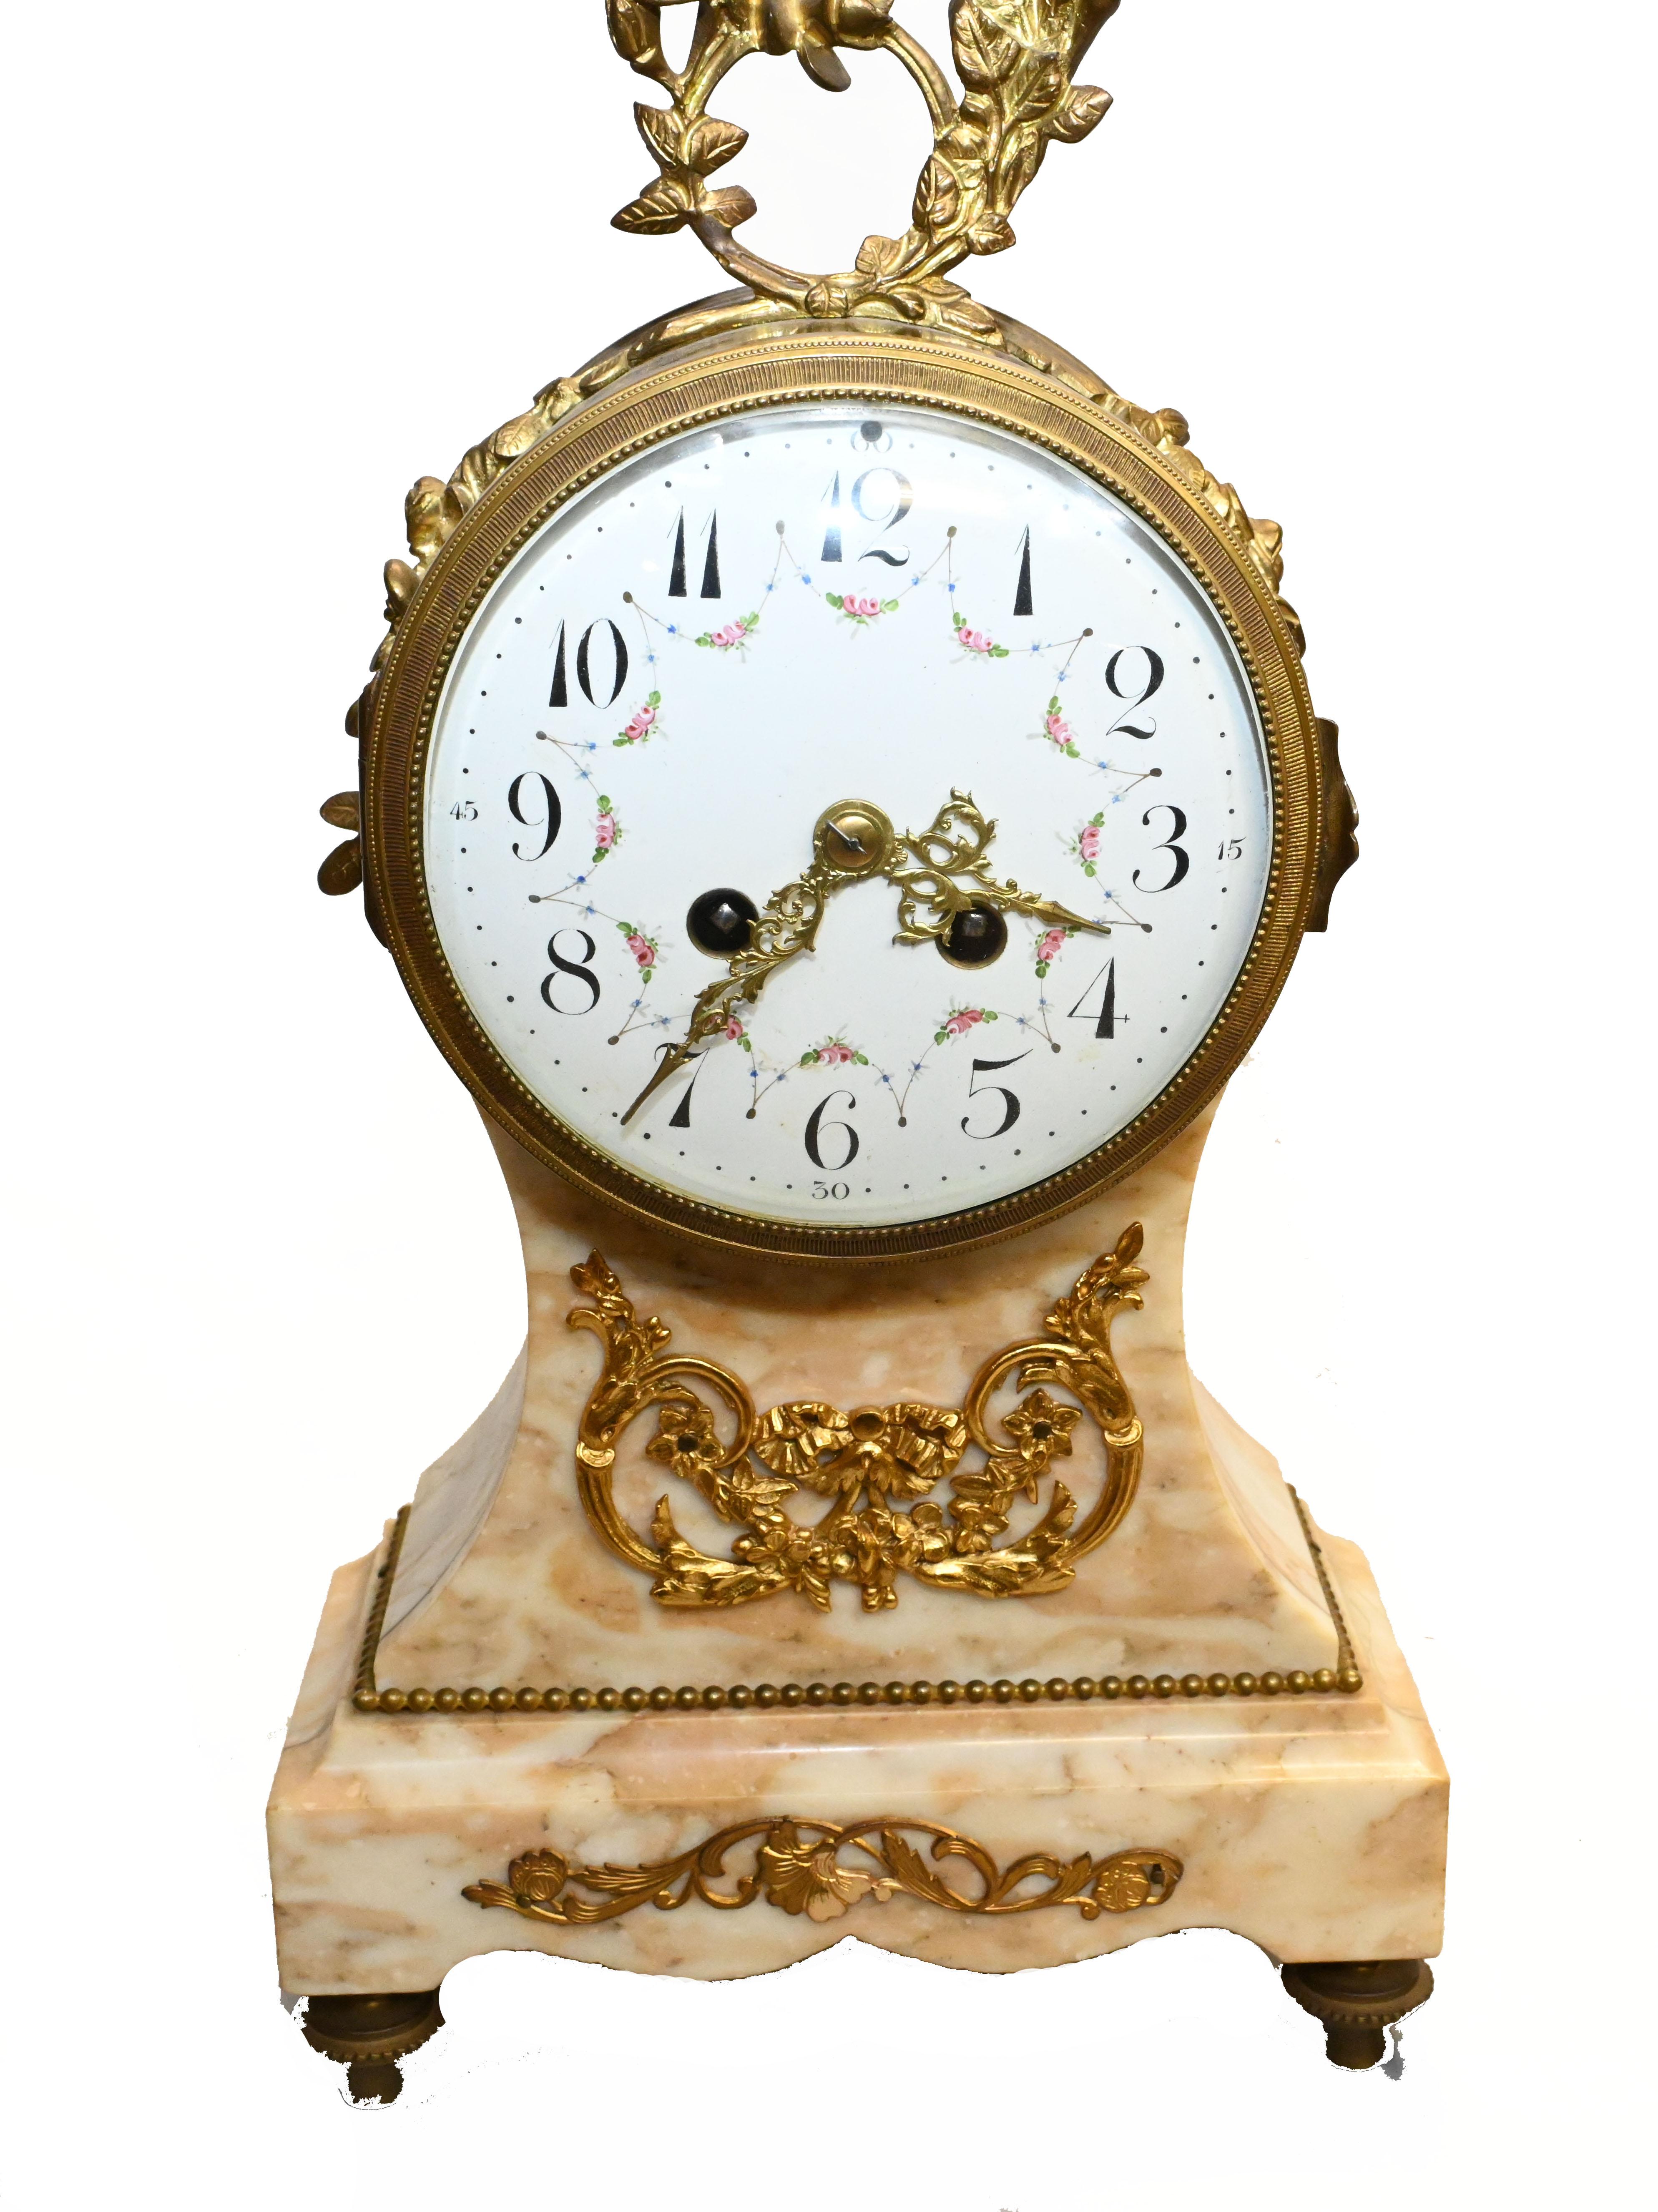 Gorgeous antique French mantle clock flanked by two matching urns
We date this set to circa 1880
Great piece, hand crafted from marble with ormolu fixtures
Bought from a dealer on Marche Biron at Paris antiques markets
Offered in great shape